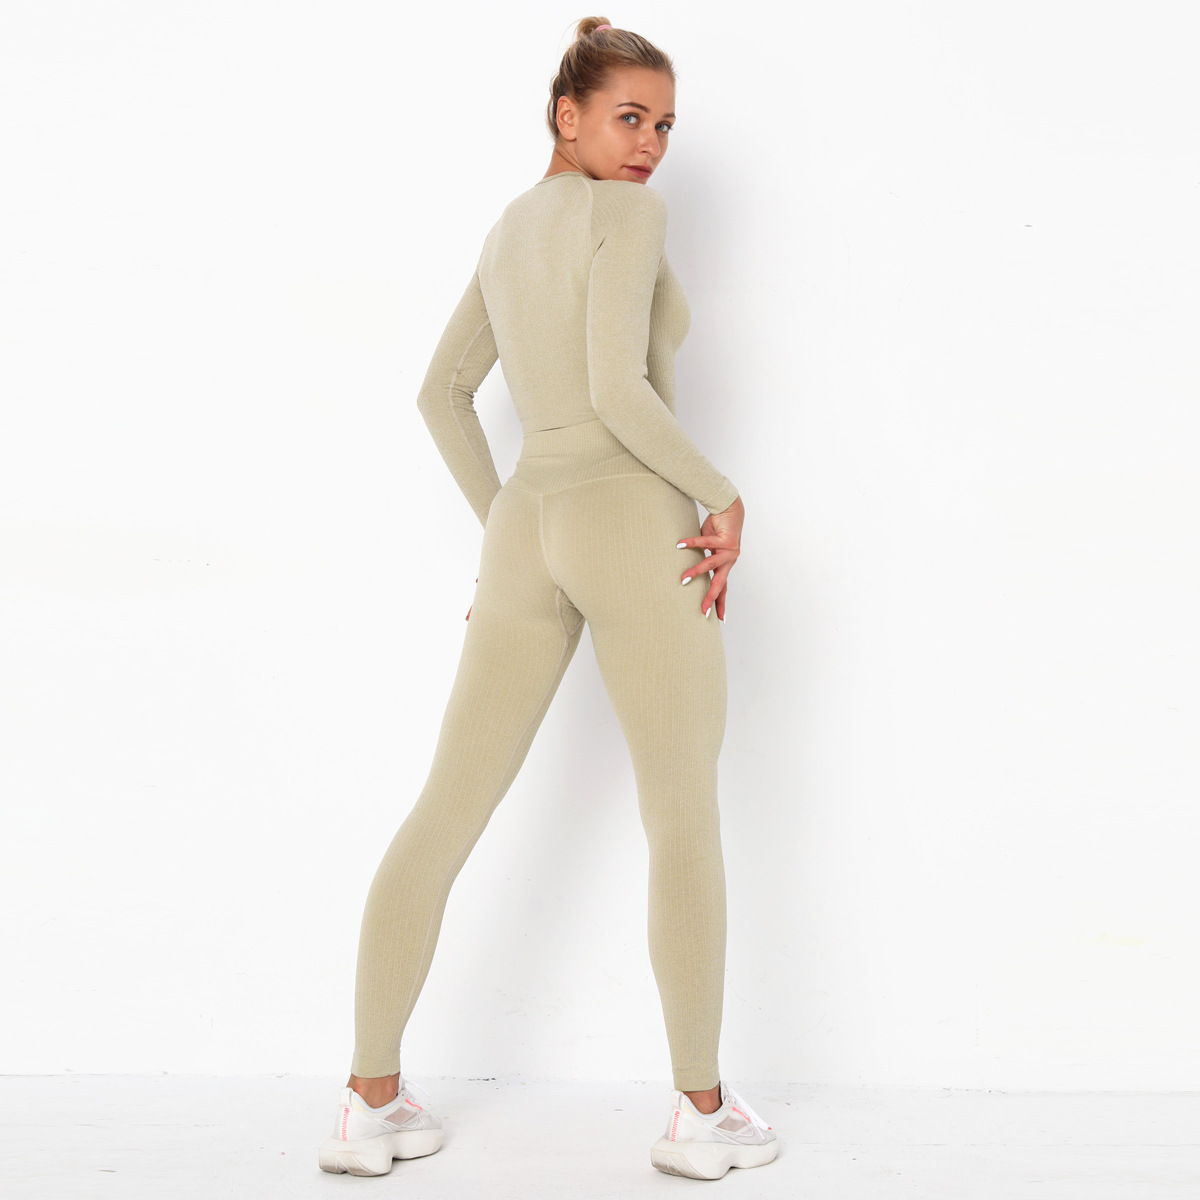 Seamless Long-Sleeved Hip-Lifting Yoga Suit NSNS12250